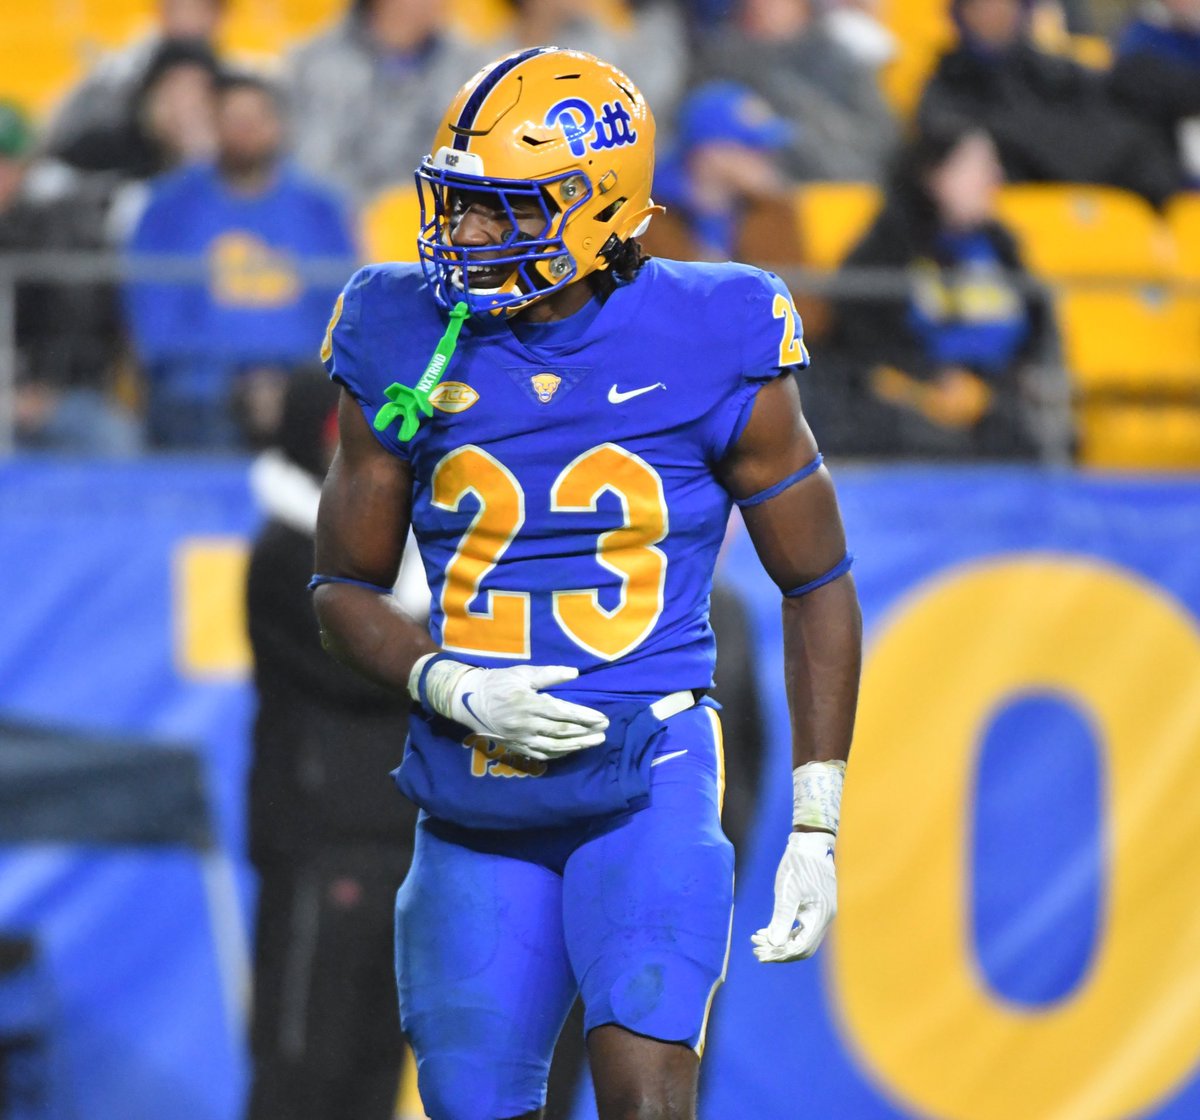 With the addition of Pitt linebacker Solomon DeShields, Mike Elko and Jay Bateman have filled multiple needs; experience and production at linebacker.

Allows them to have a much more competitive summer and fall practices, and at the worst brings in a very productive LB3.